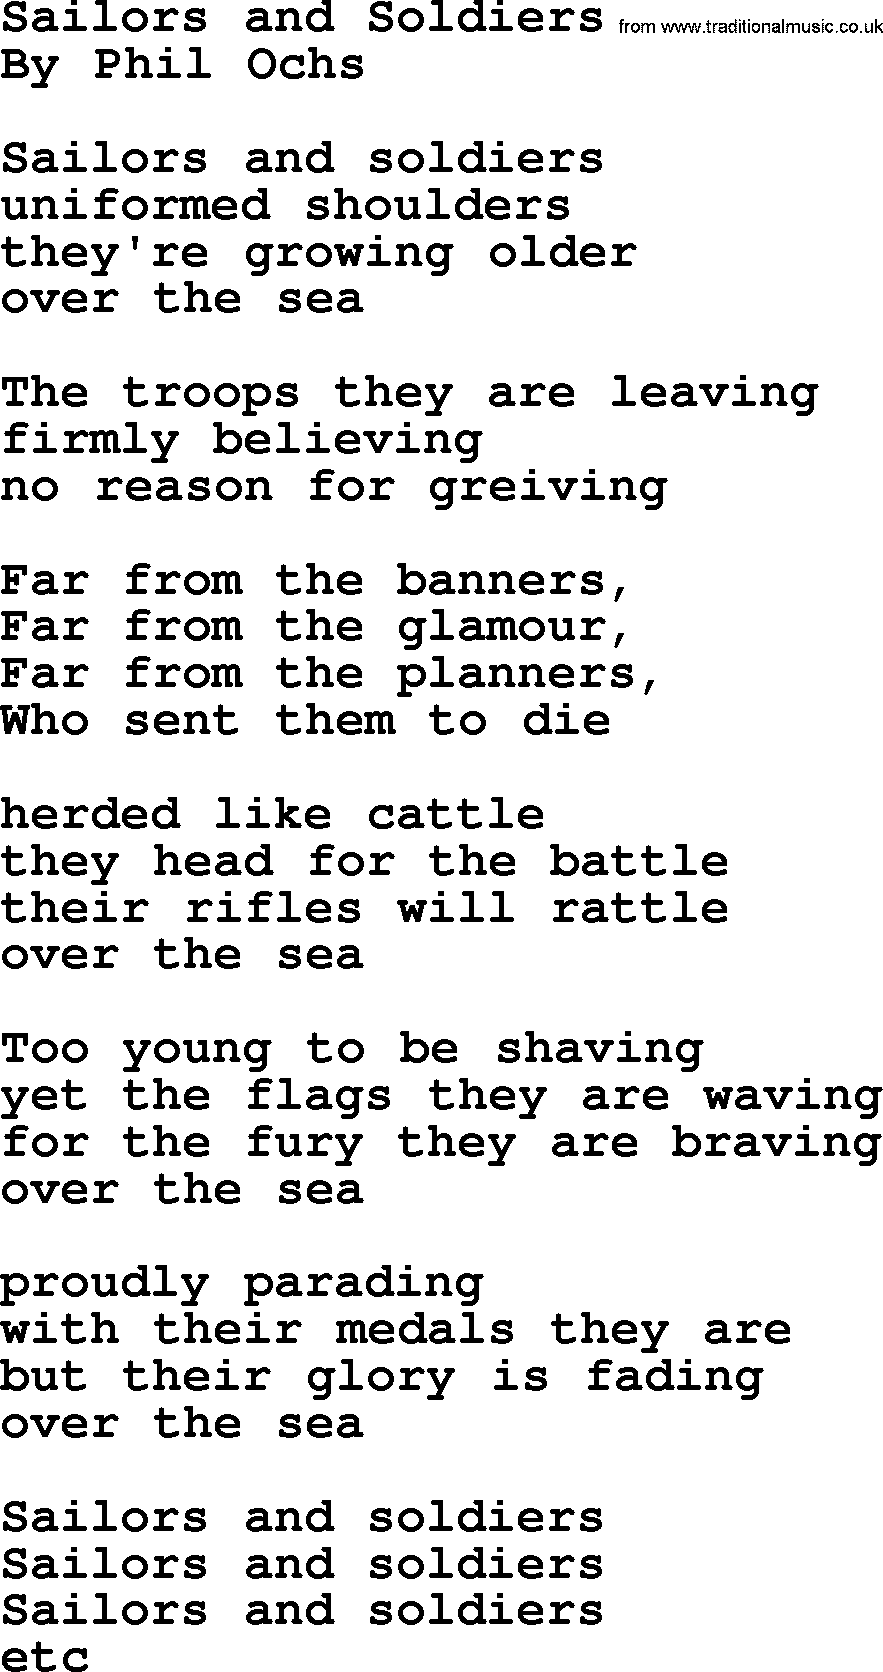 Phil Ochs song Sailors And Soldiers, lyrics